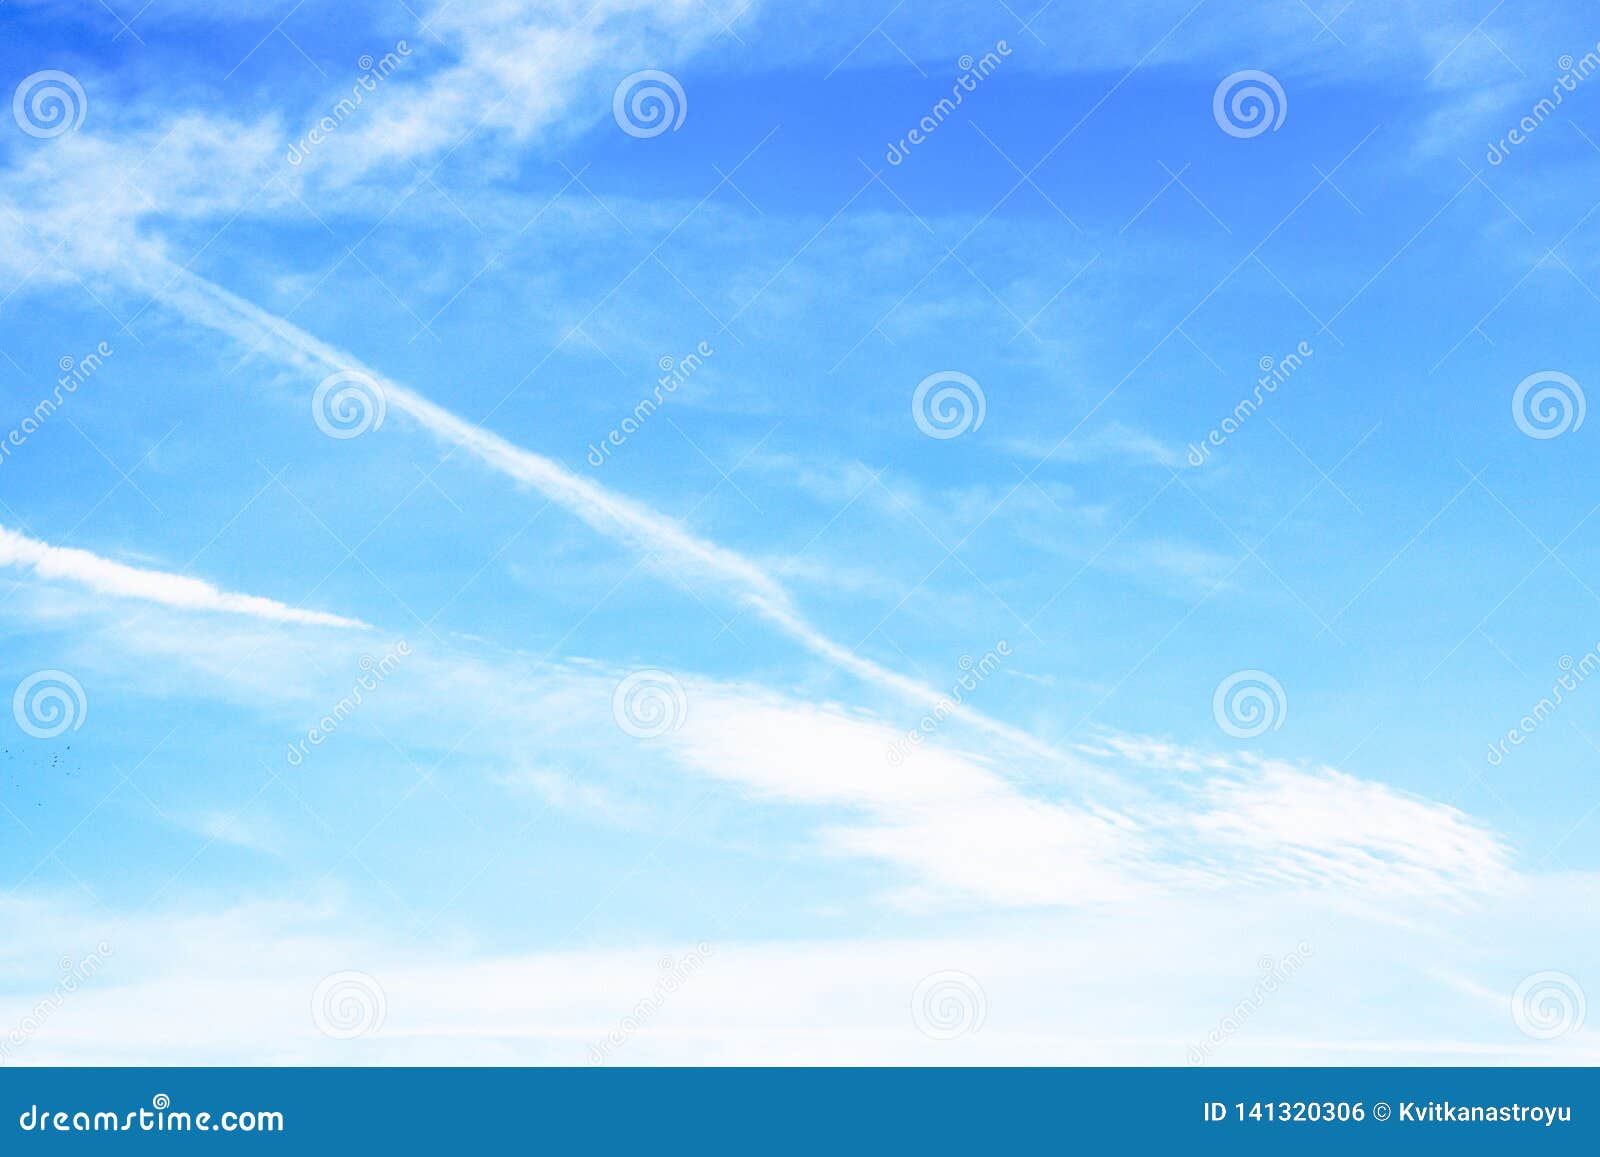 blue sky with cirro cumulus white stripes clouds. sky background